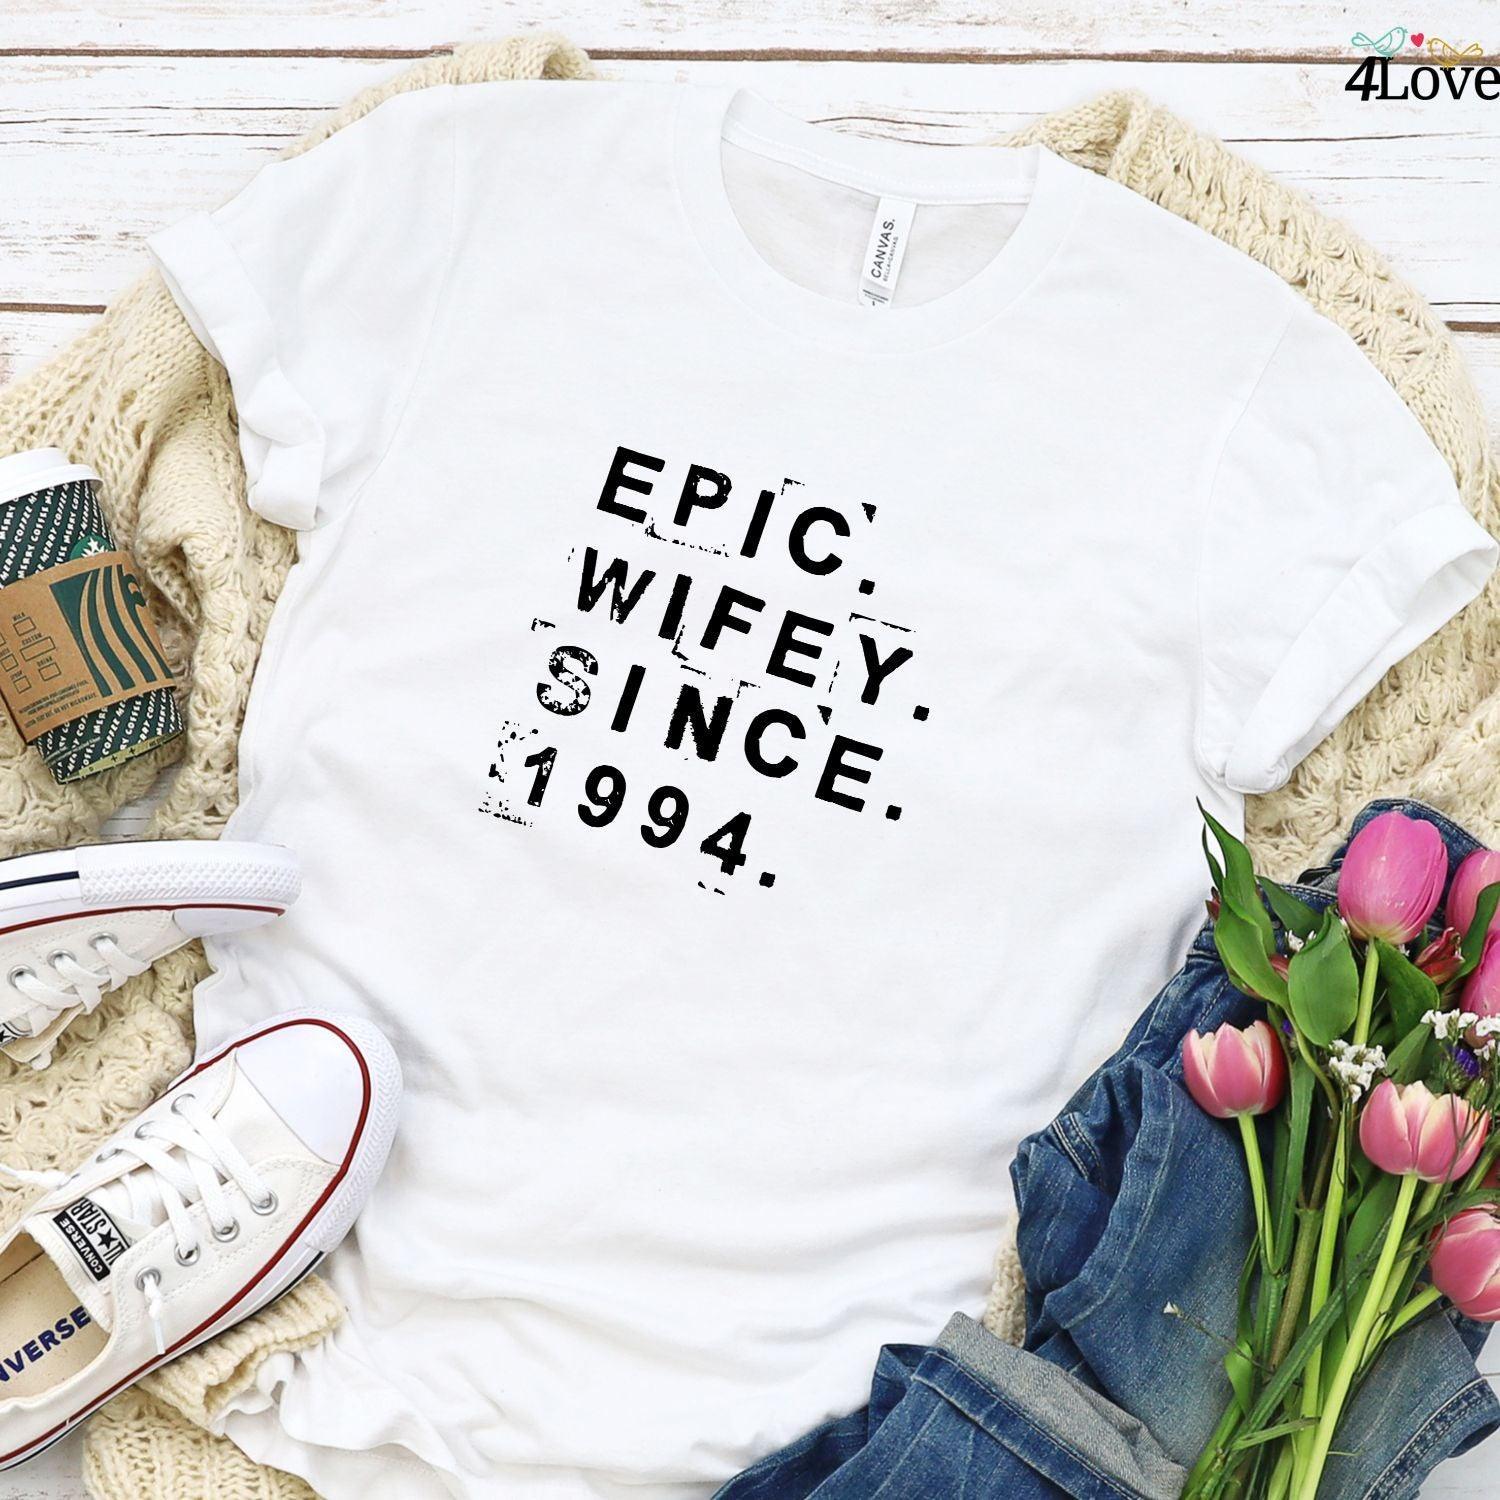 Epic Hubby & Wifey Since [Date] - Custom Matching Set for Couples' Outfits - 4Lovebirds